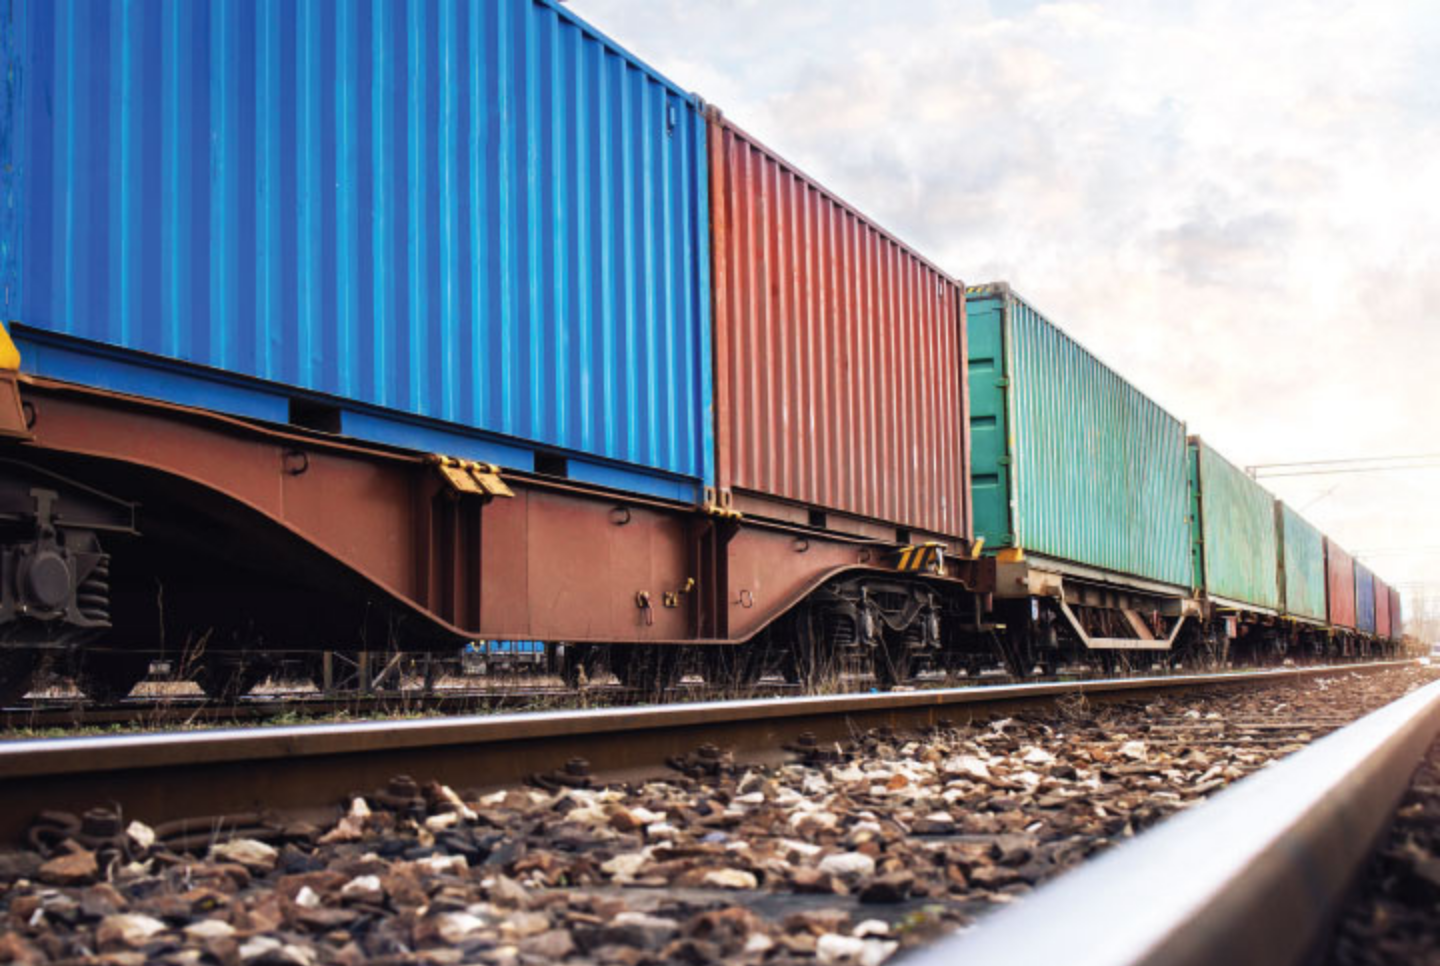 cargo containers loaded on a train. Congress’ attempt to intervene with the on-going dispute over demurrage and detention fees gives shippers too few tools to hold carriers and terminal operators accountable for unjust fees.